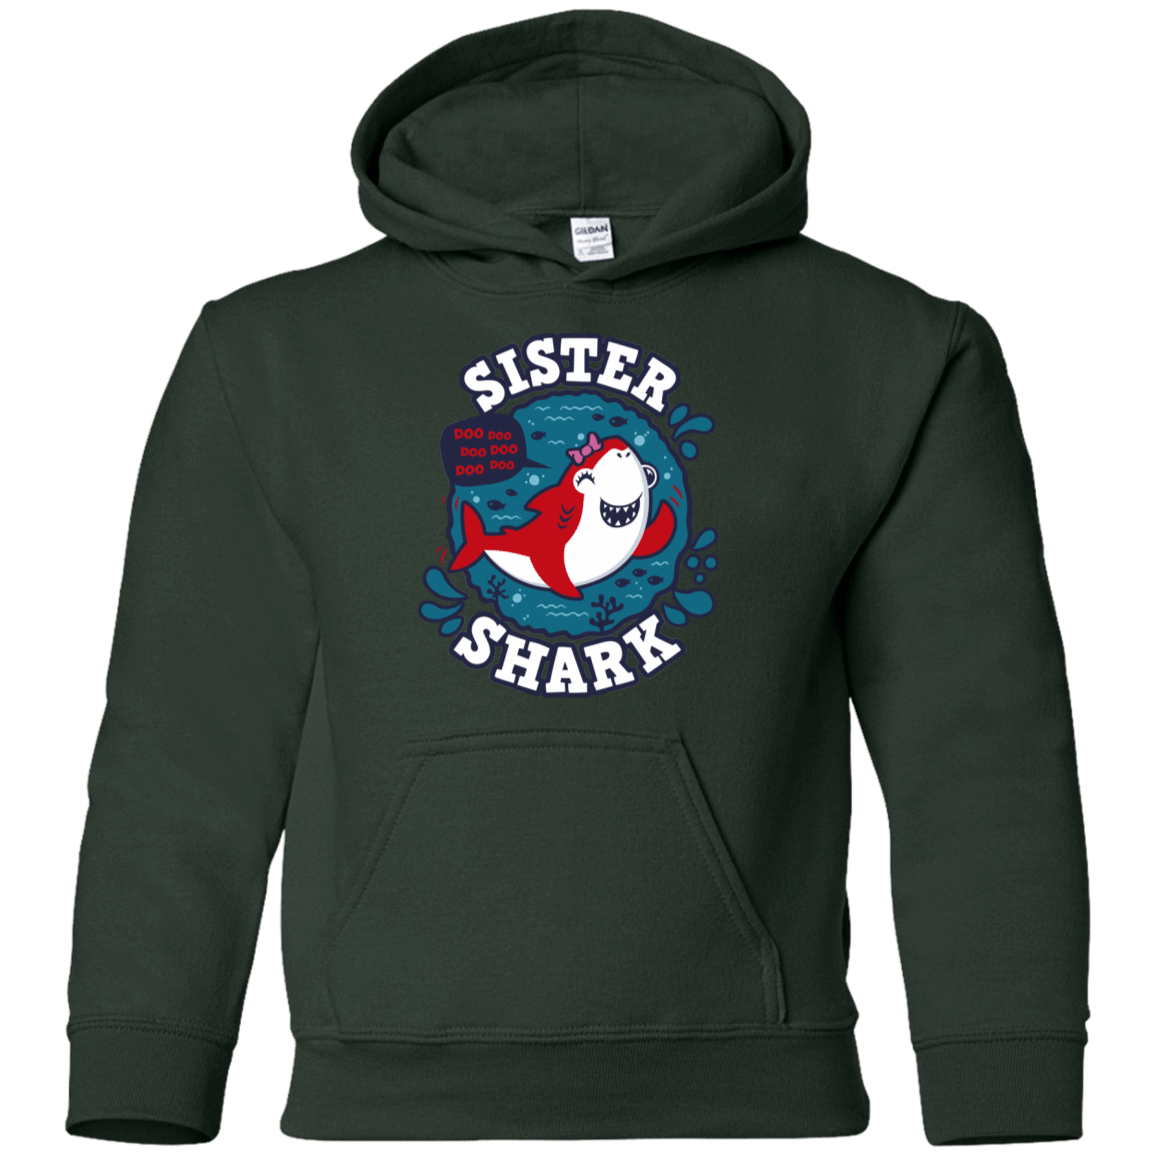 Sweatshirts Forest Green / YS Shark Family trazo - Sister Youth Hoodie